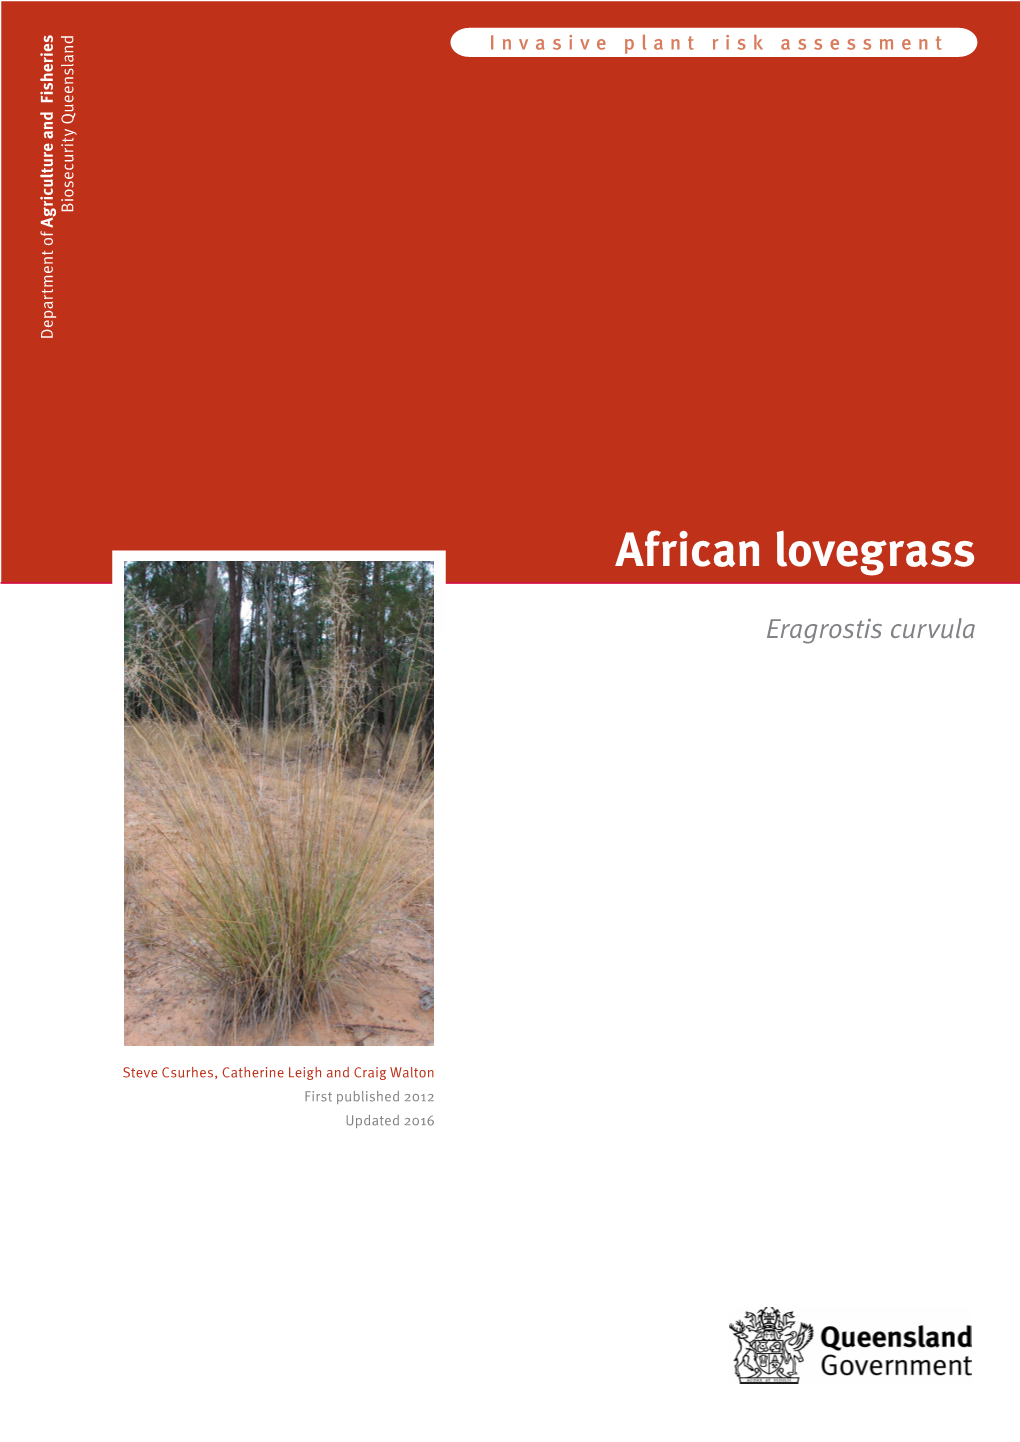 African Lovegrass (Eragrostis Curvula) Is a Morphologically Variable Perennial Plant Native to Semi-Arid Upland Areas of Subtropical Southern and Eastern Africa